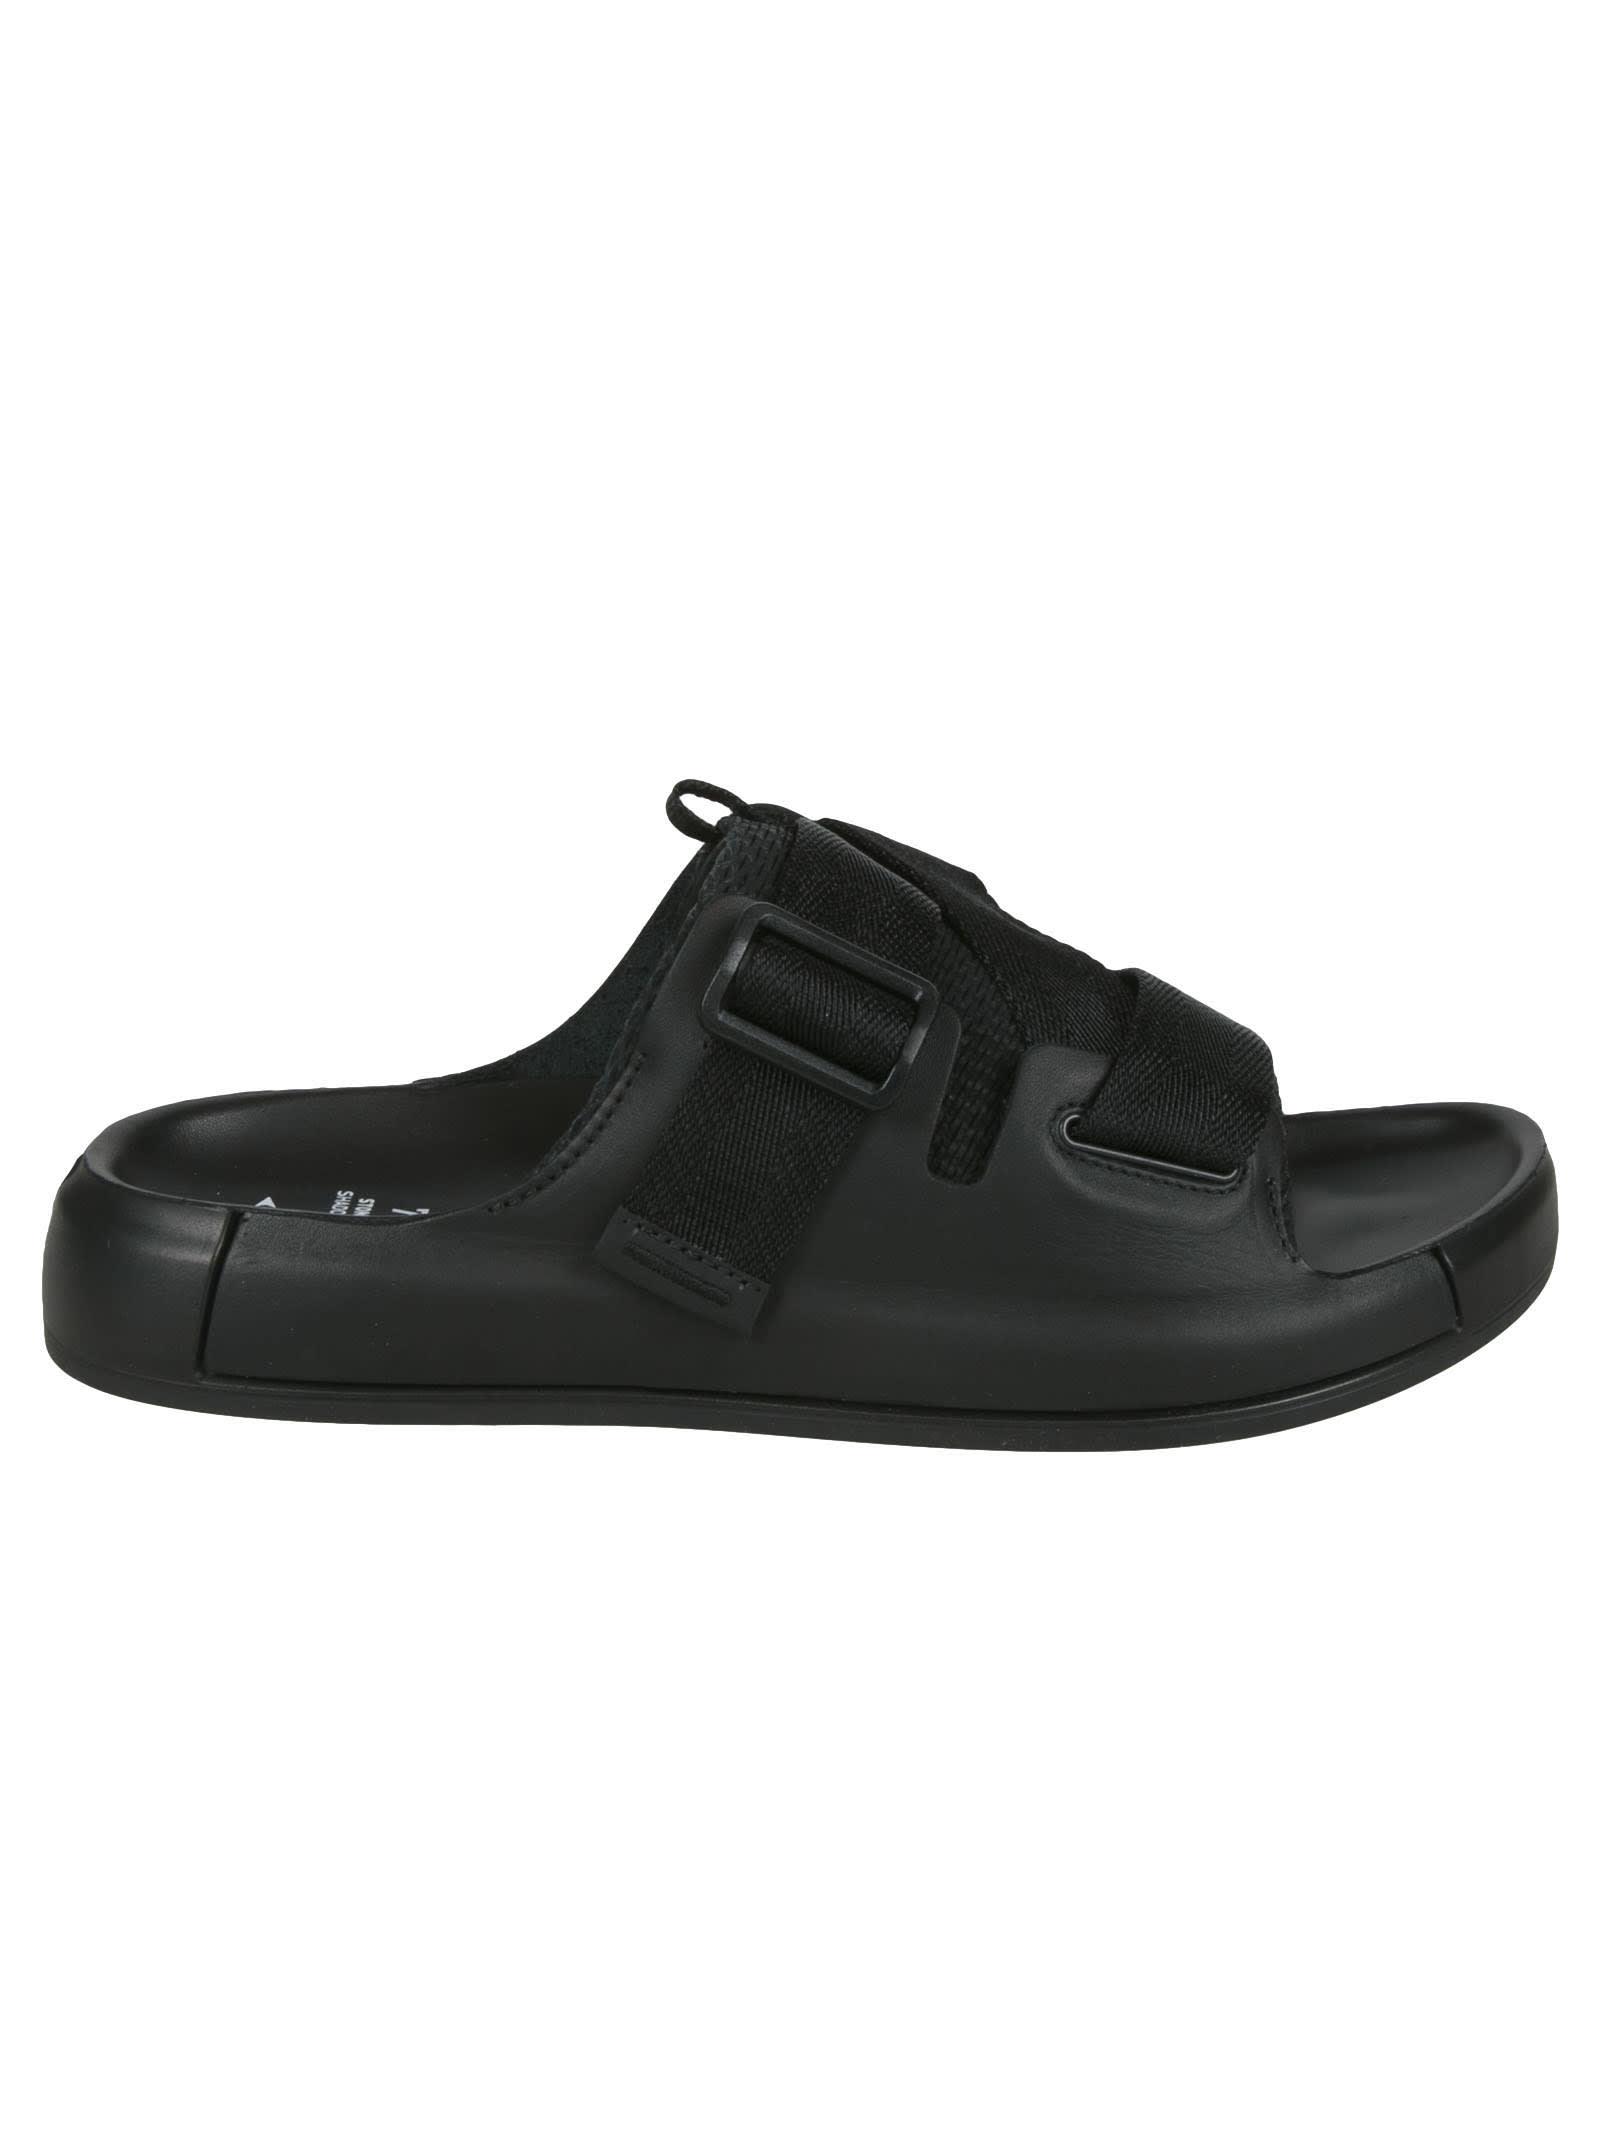 Stone Island Shadow Project Velcro Strap Sliders in Black for Men - Save 9%  | Lyst